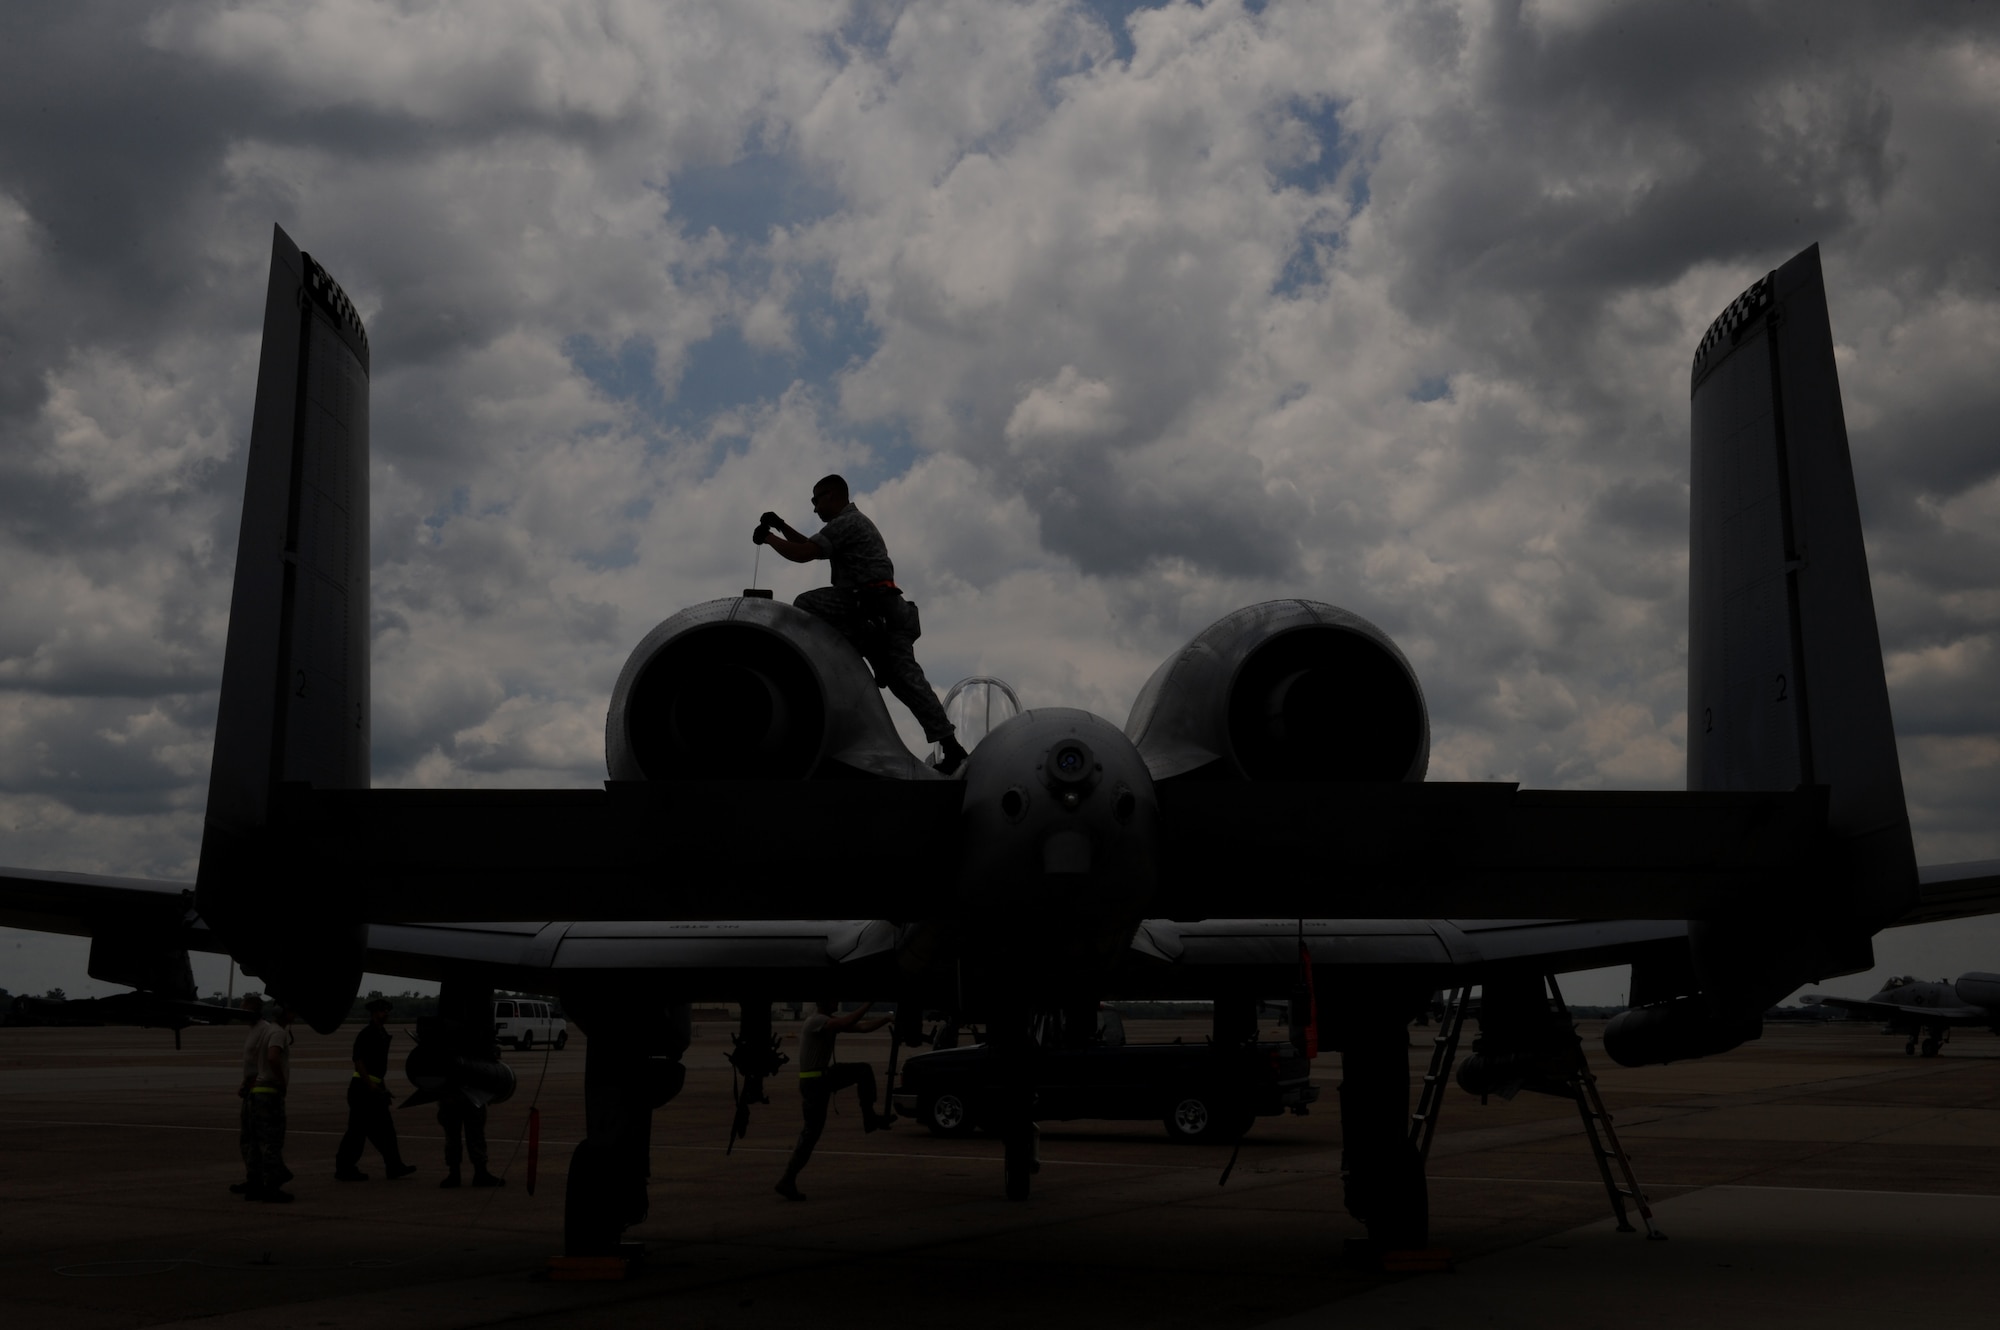 Senior Airman Jason Norris, a crew chief from Moody Air Force Base, Ga., conducts a joint oil analysis on an A-10 Thunderbolt II fighter on Barksdale Air Force Base, La., June 4, 2013. Crew chiefs must check the oil inside the engine 15 minutes after landing for metal shavings. If there is a certain concentration of metal shavings inside the oil, maintainers must find and fix the source of the problem. (U.S. Air Force photo/Airman 1st Class Benjamin Gonsier)